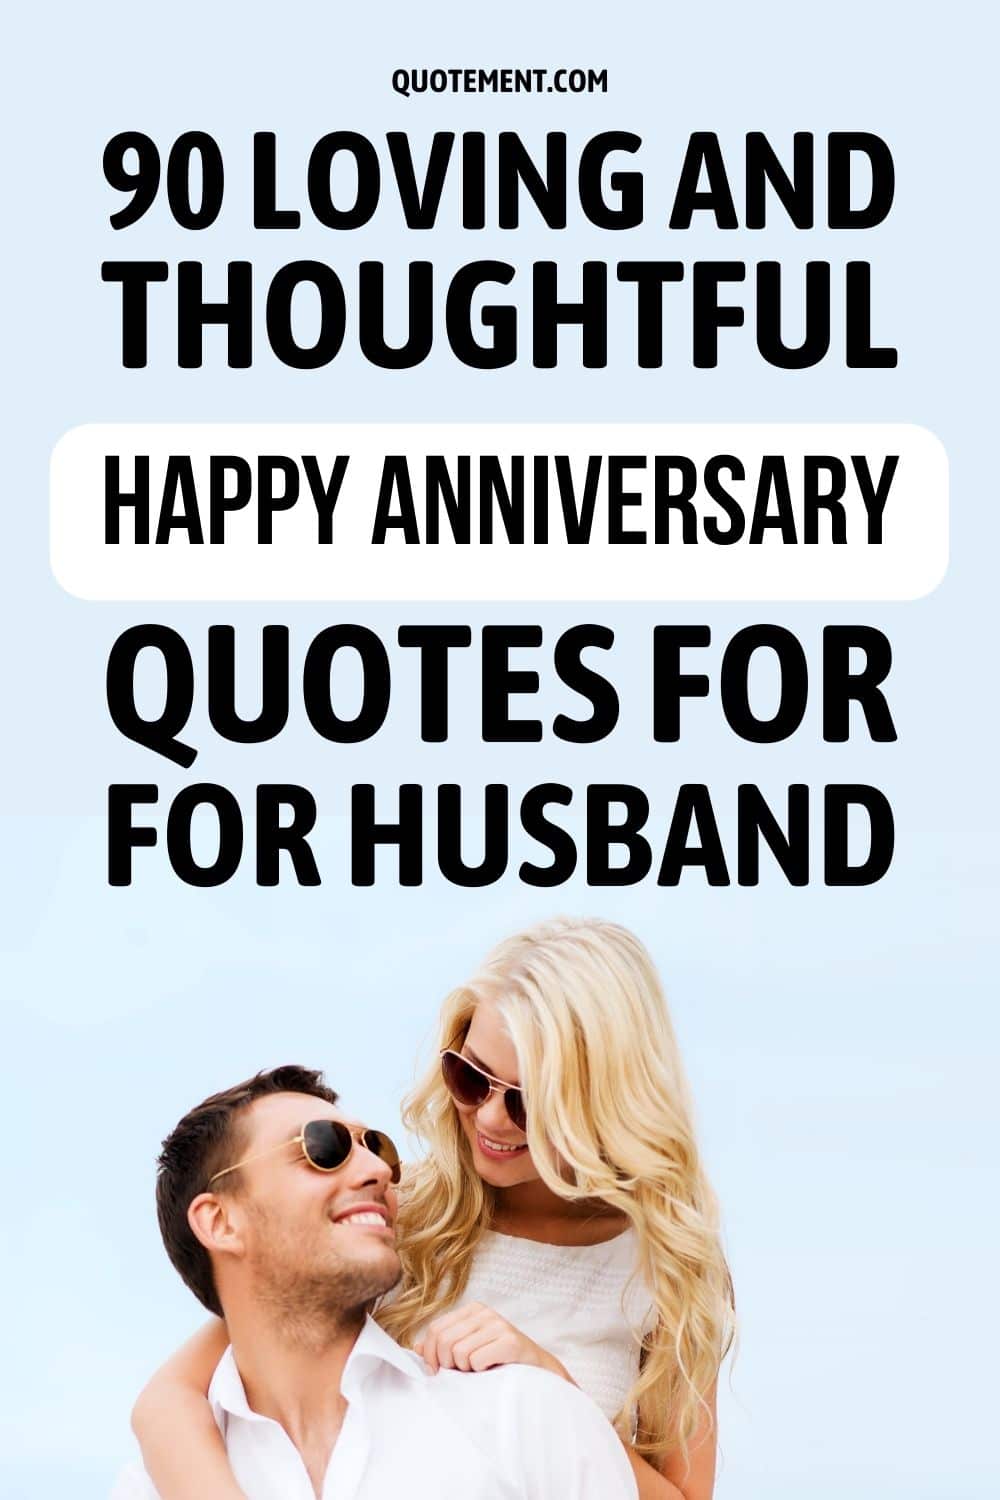 90 Loving and Thoughtful Happy Anniversary Quotes for Husband